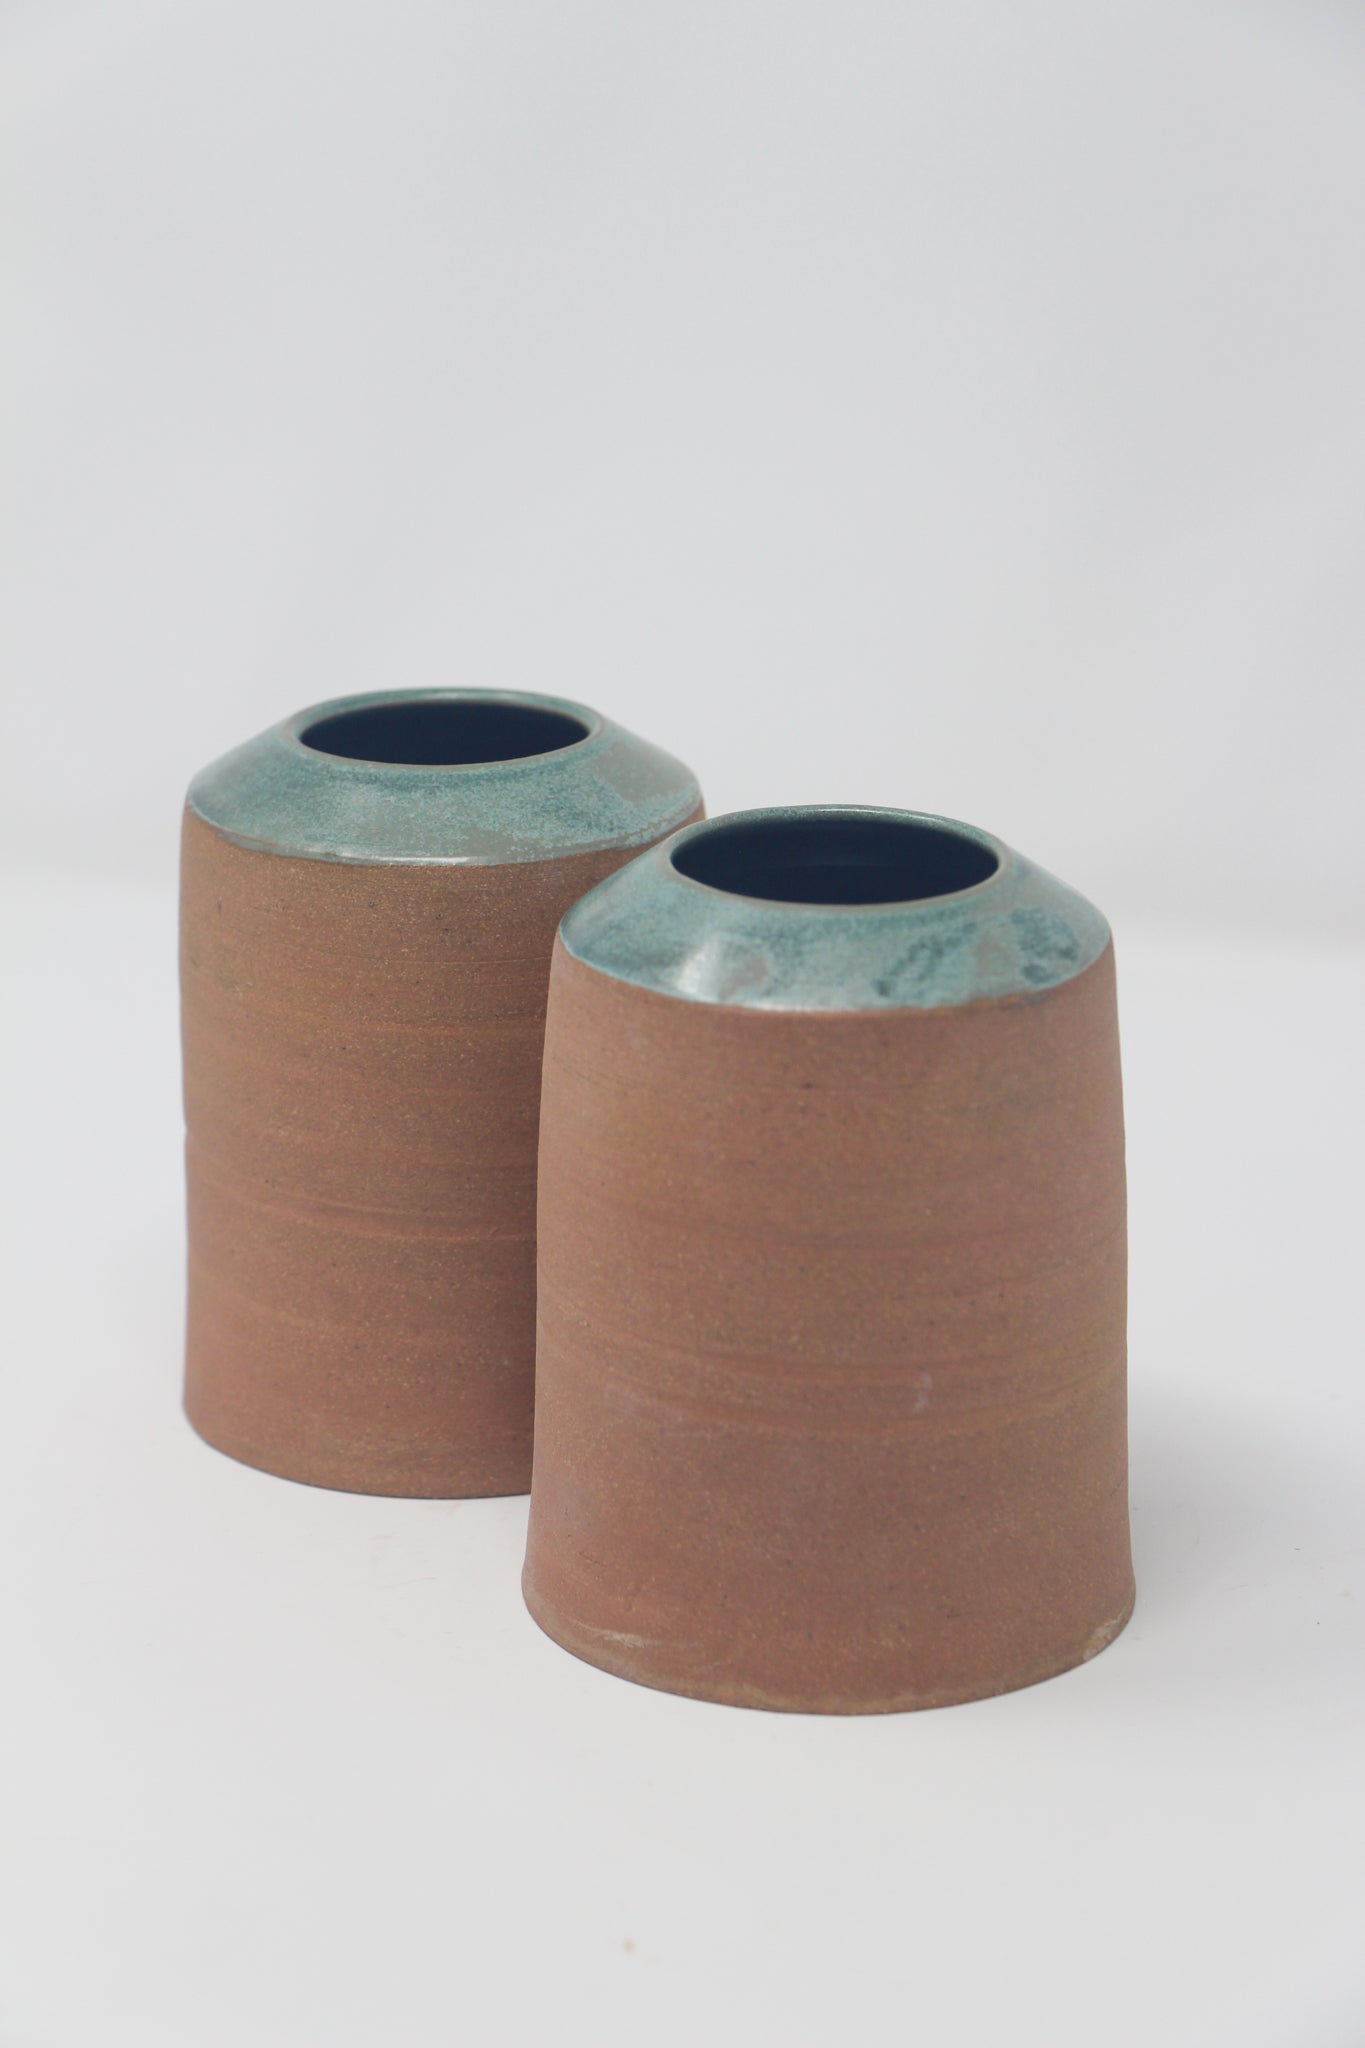 Pair of Small Vases, Emerald